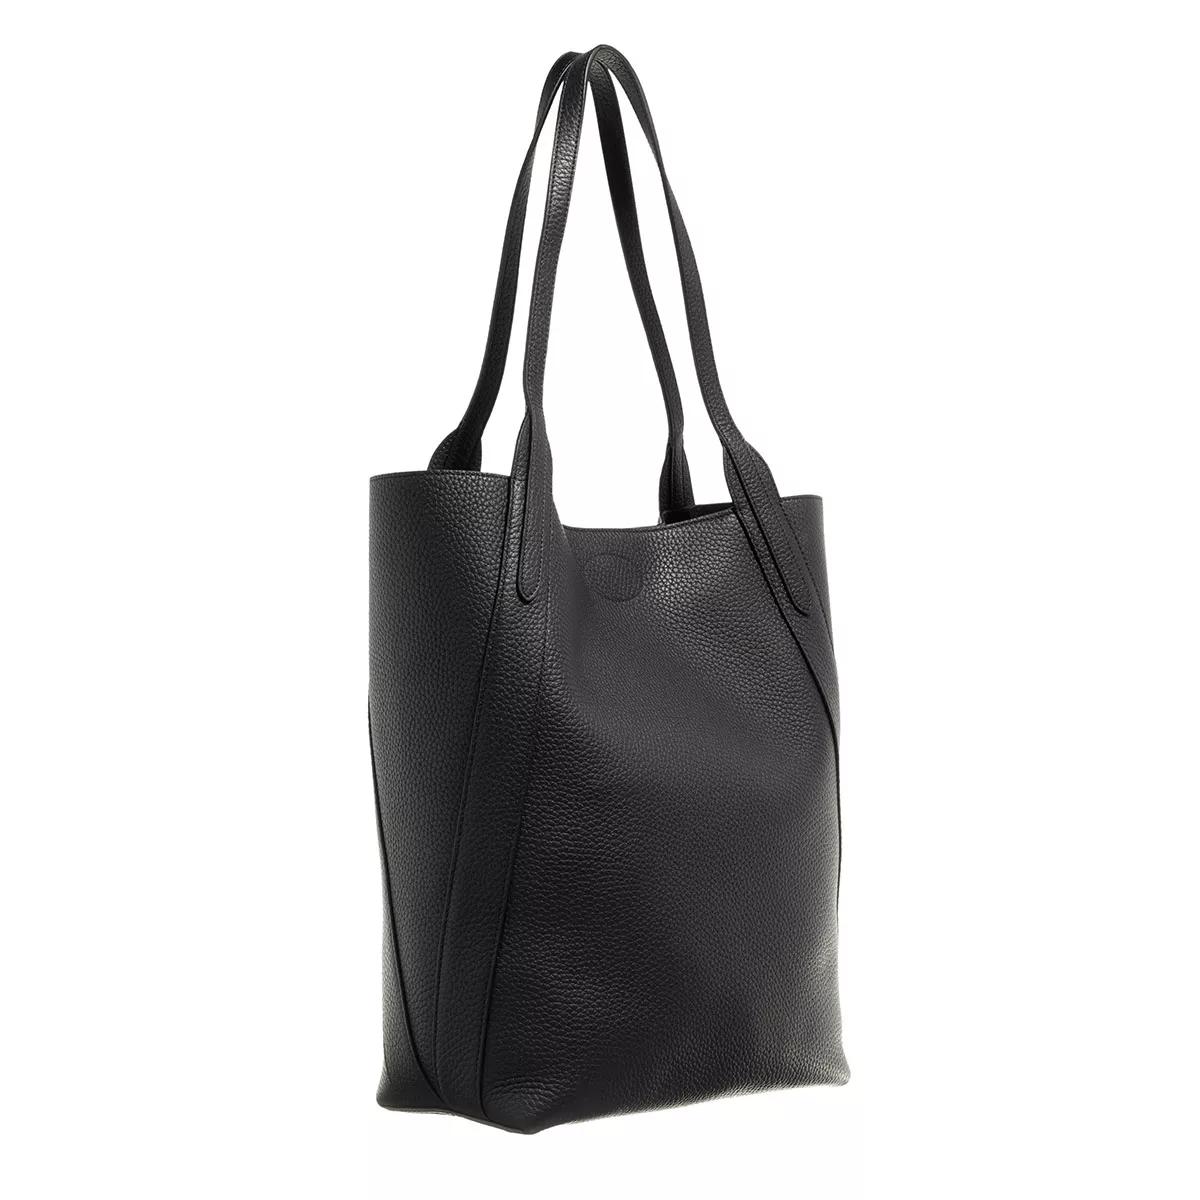 Mulberry Hobo bags North South Bayswater Tote in zwart